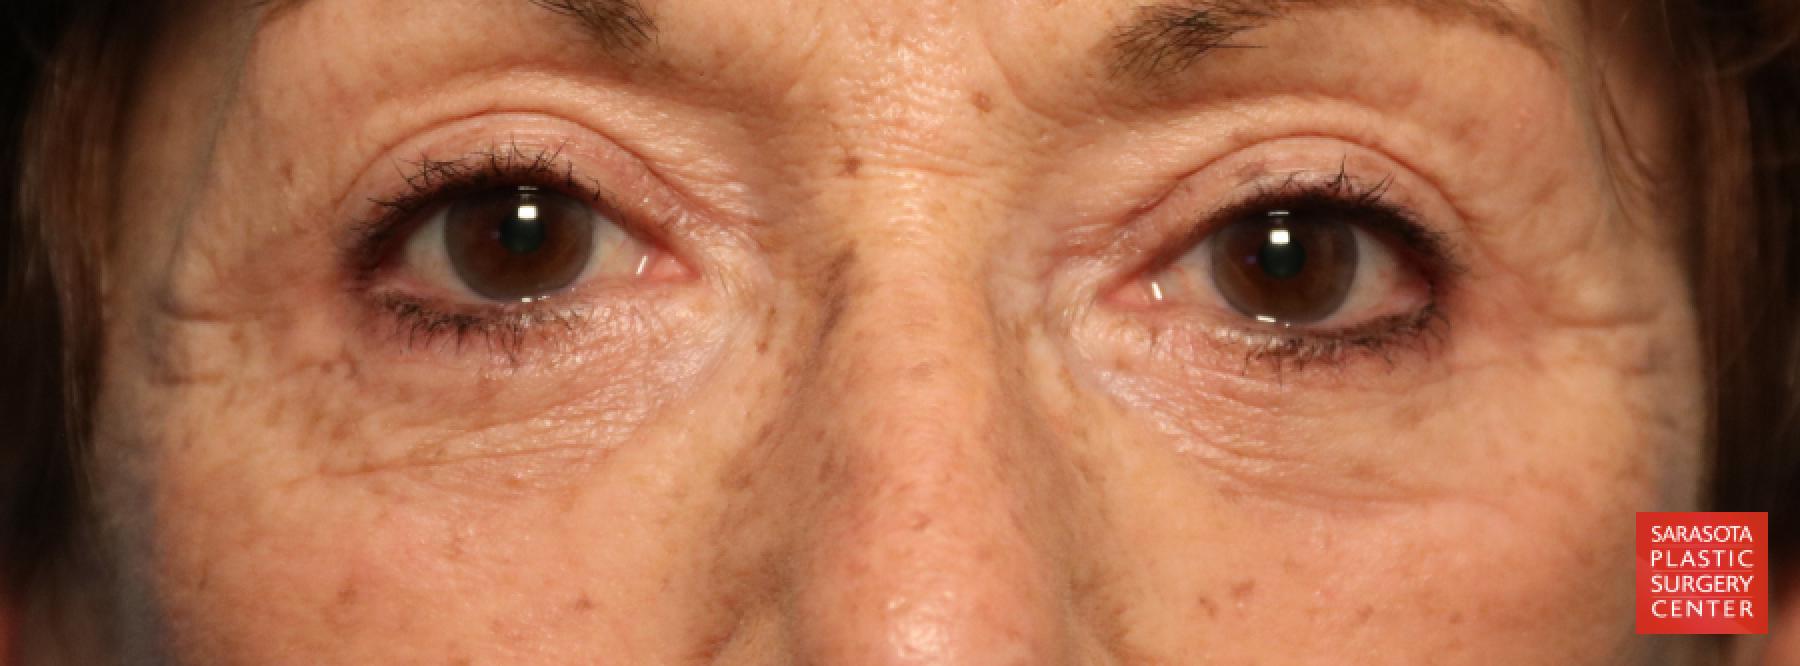 Eyelid Lift: Patient 6 - After 1